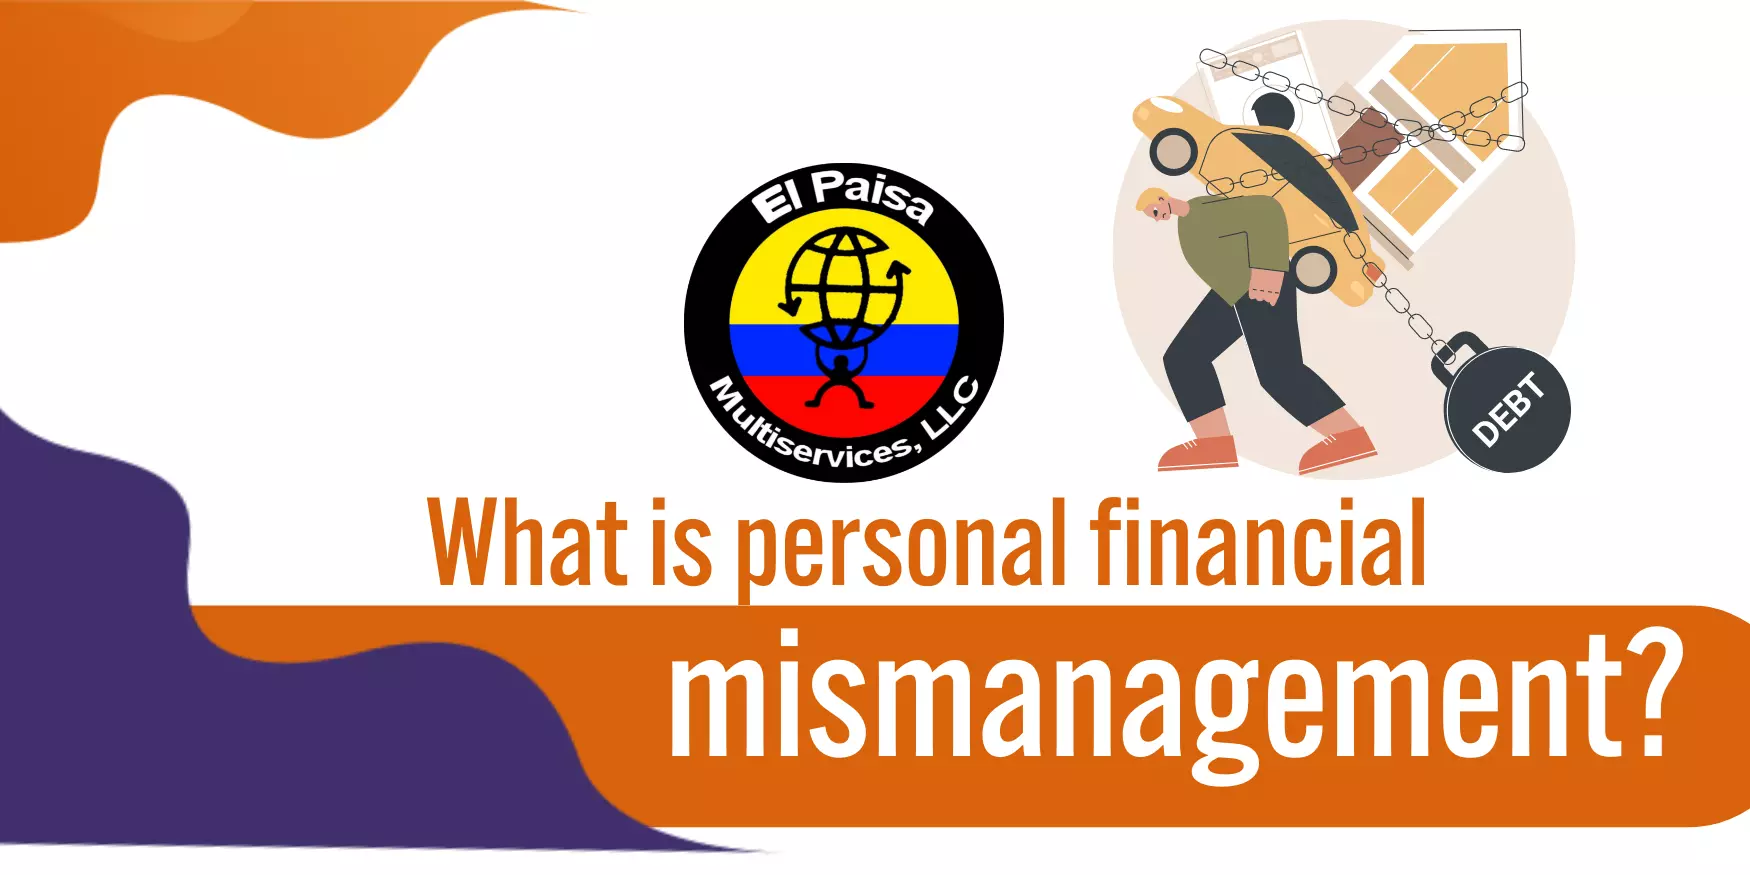 What is personal financial mismanagement